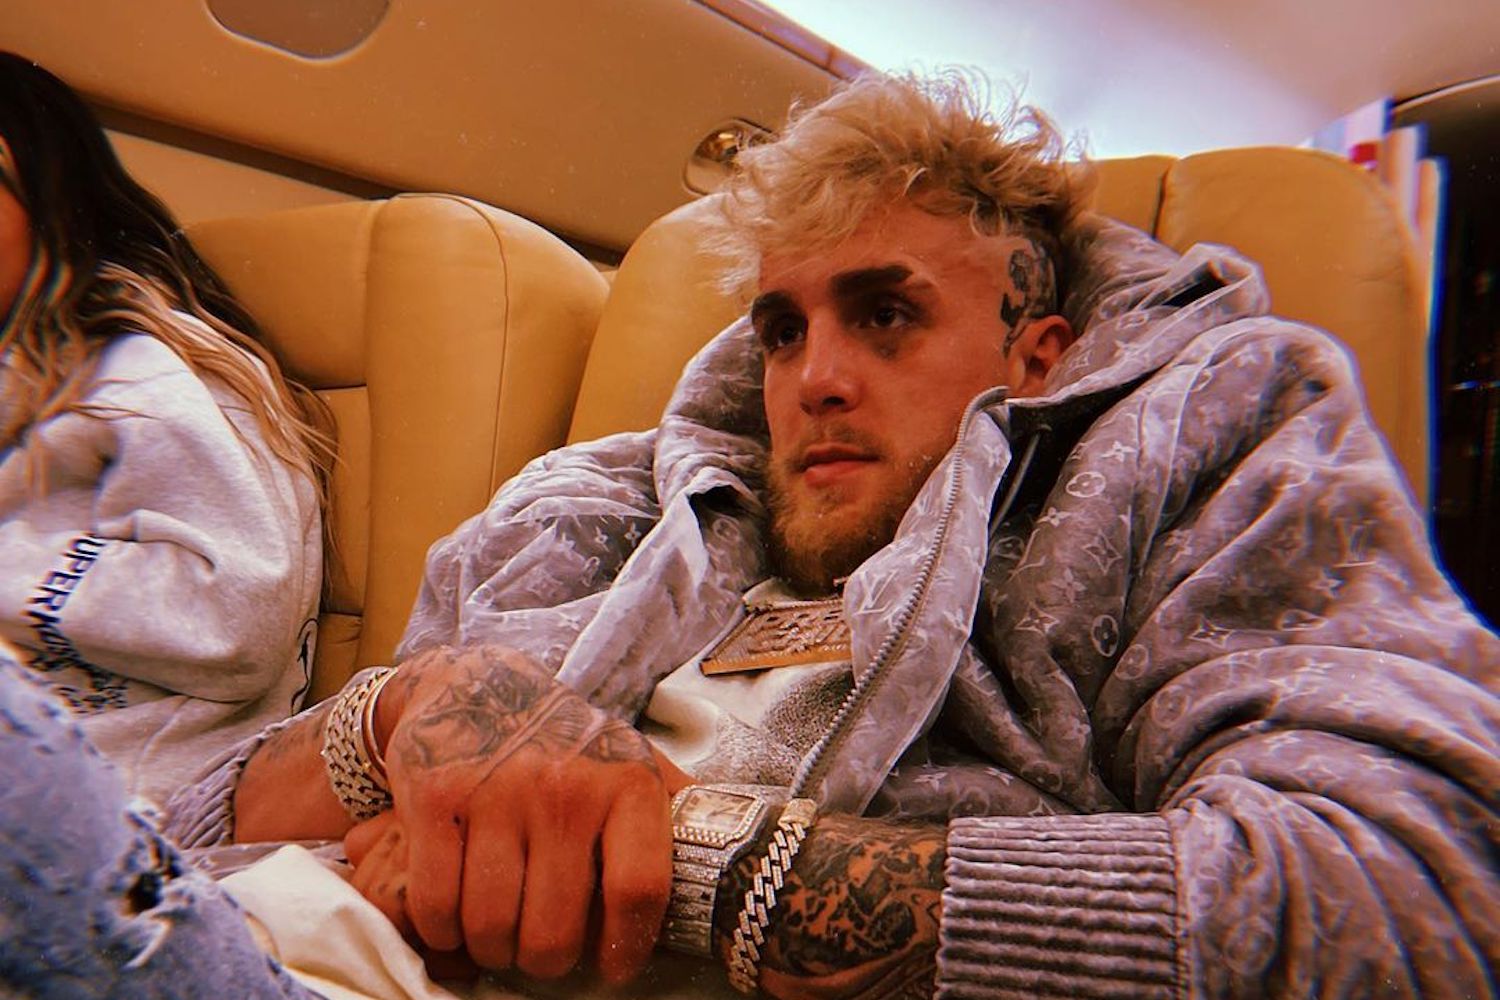 Jake Paul Takes His First Professional Loss On The Wrist